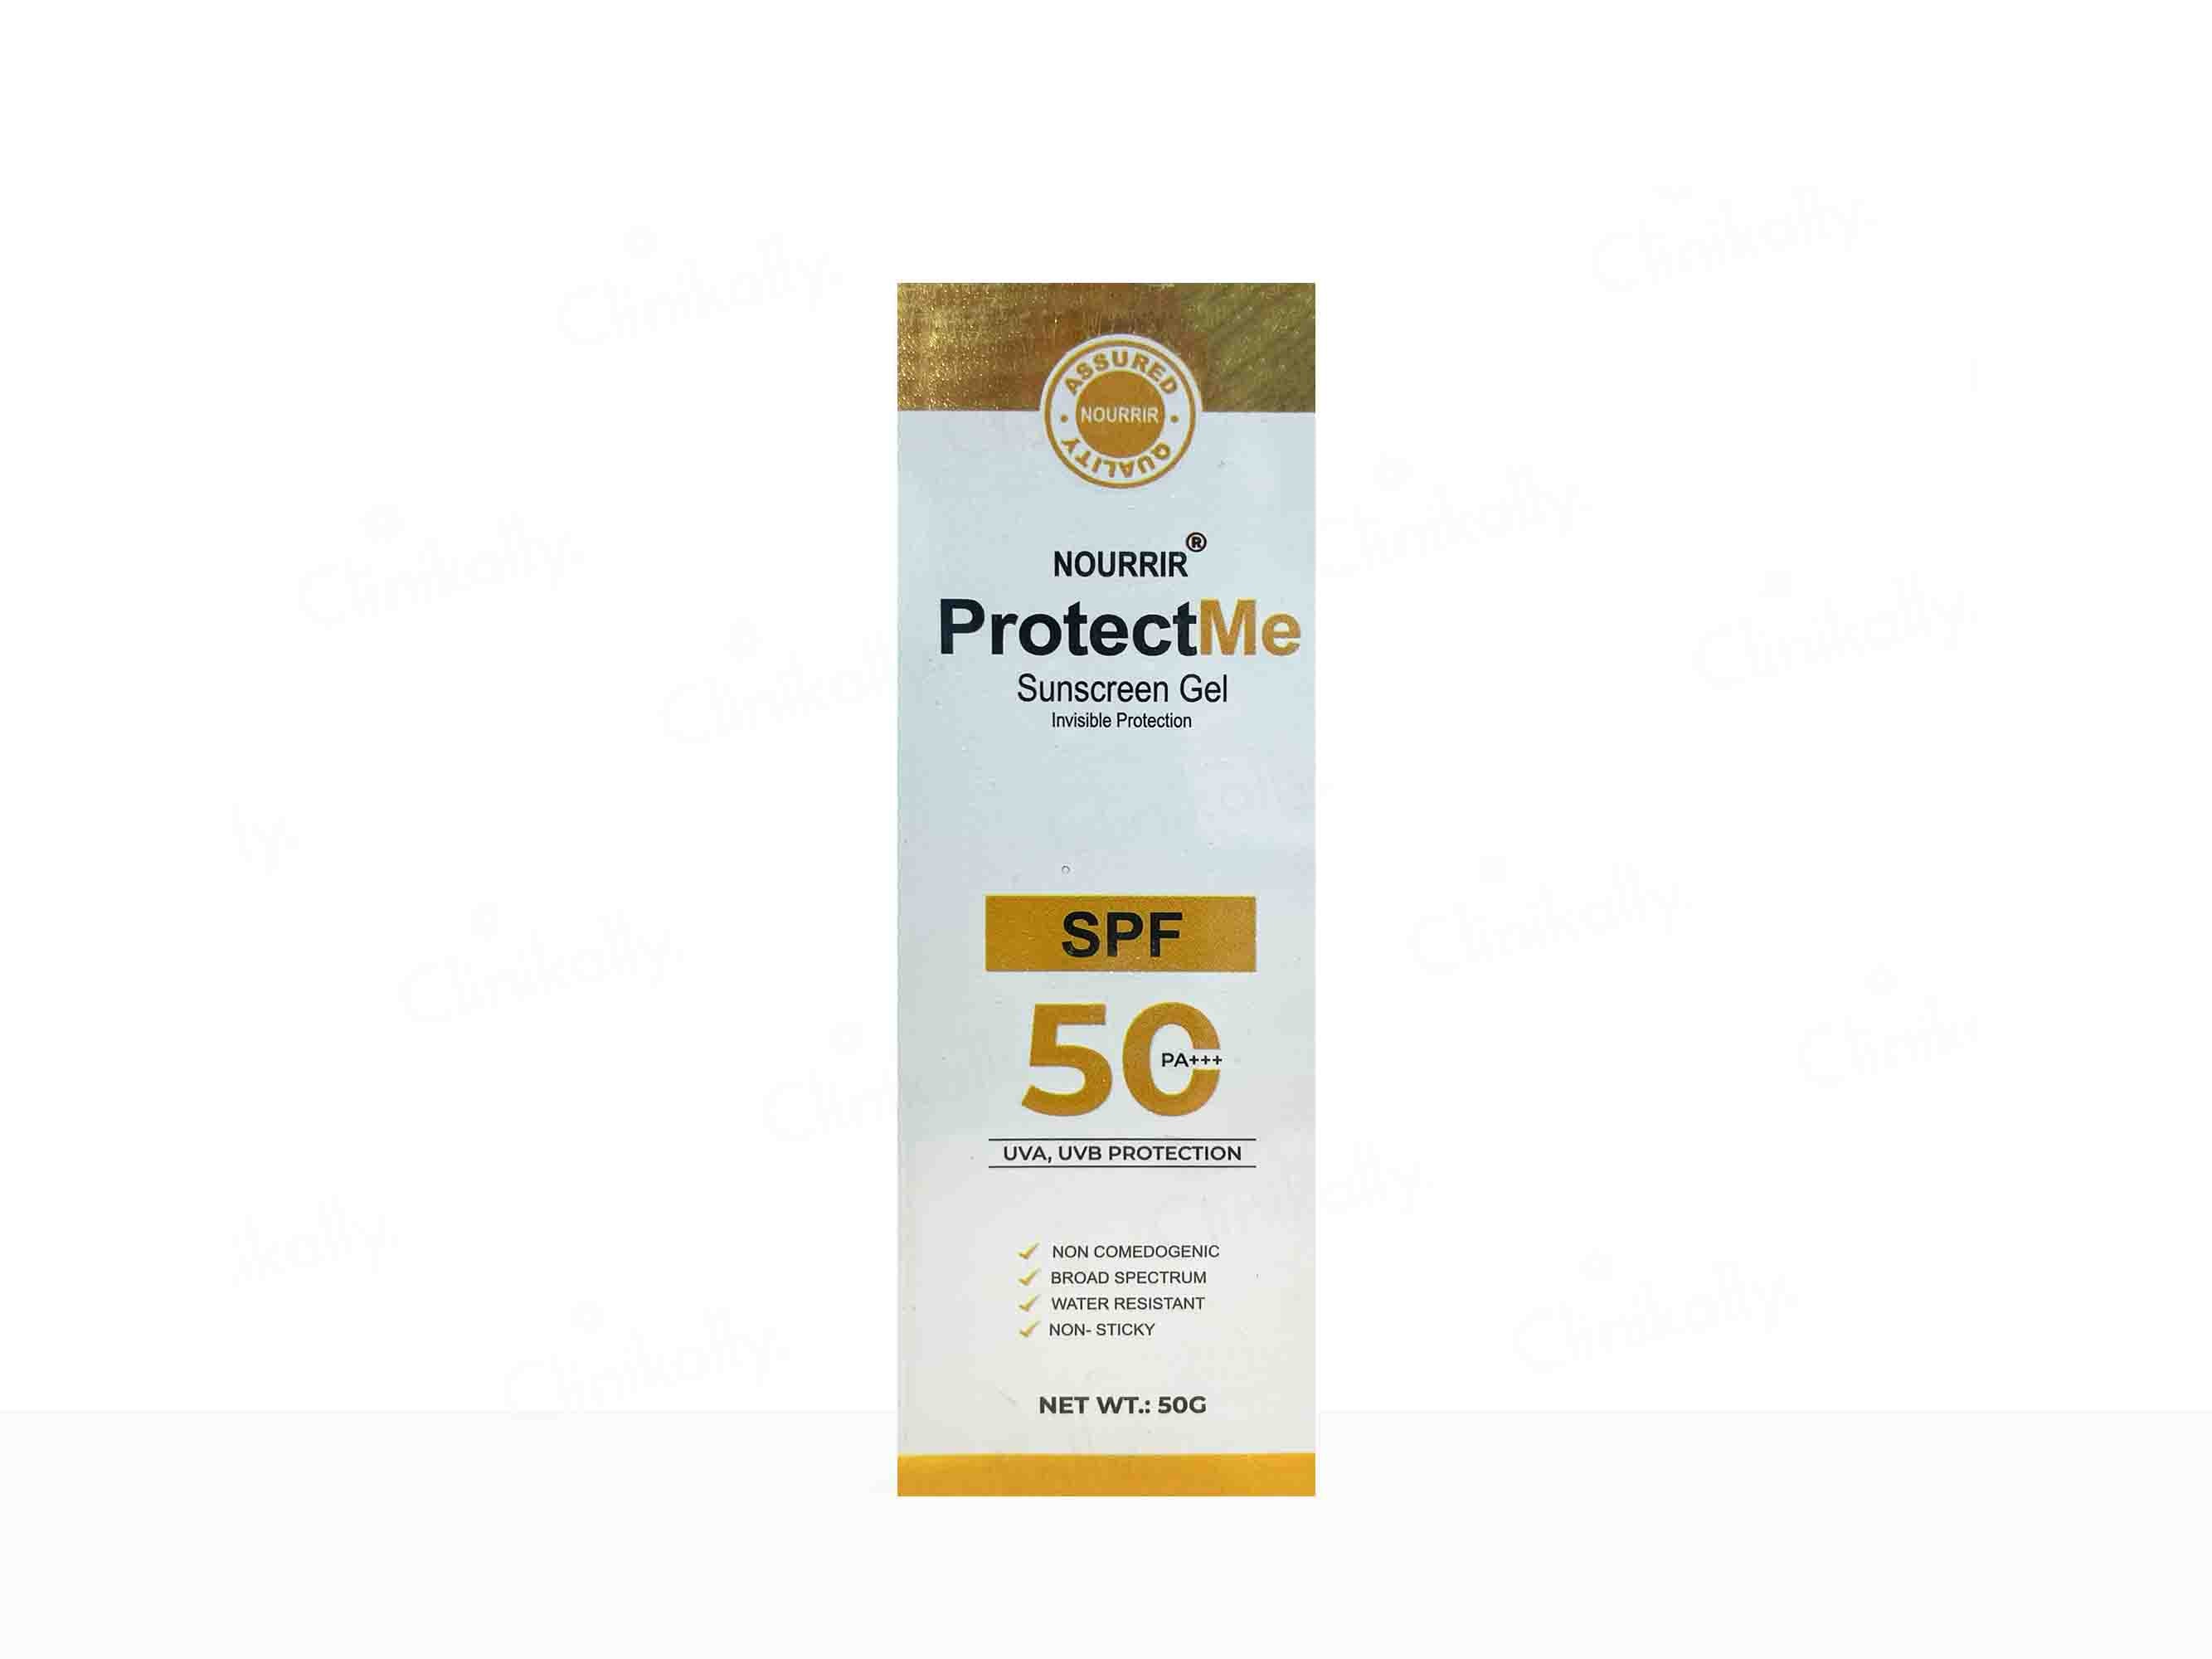 ProtectMe Invisible Sunscreen Gel SPF 50 PA+++